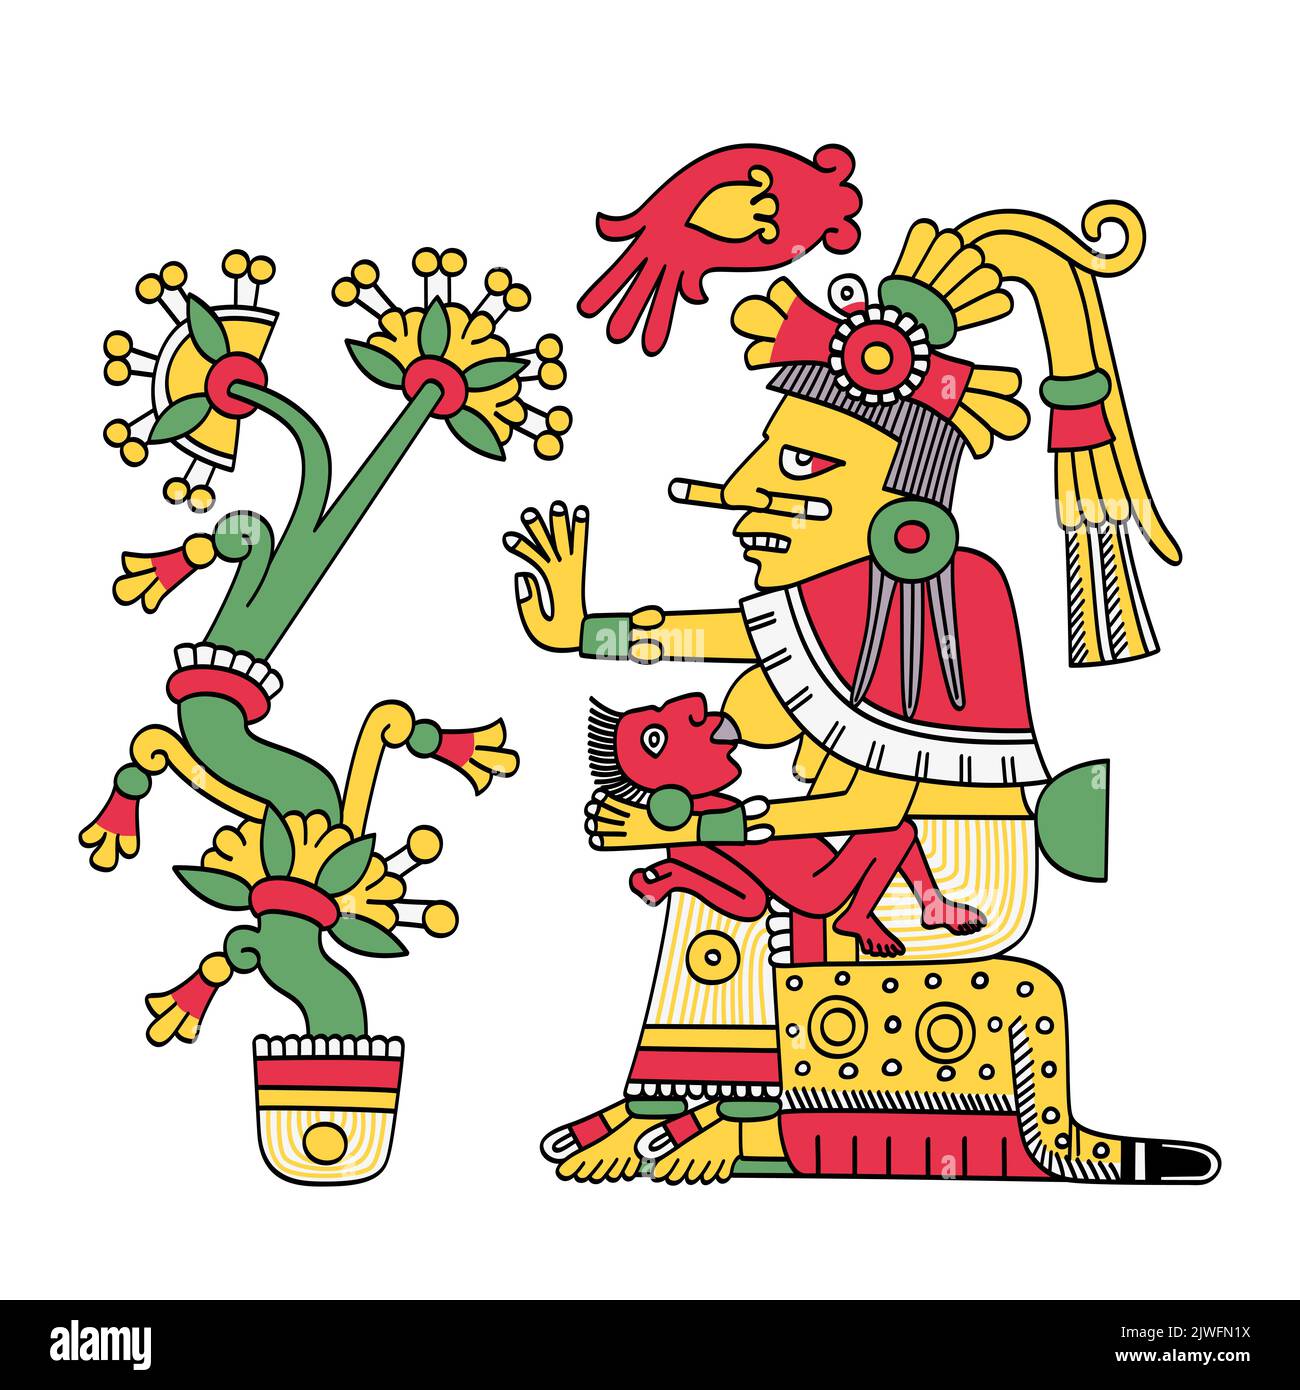 Chalchiuhtlicue, Aztec goddess of water, rivers, seas, streams, storms, and baptism, associated with fertility, and a patroness of childbirth. Stock Photo